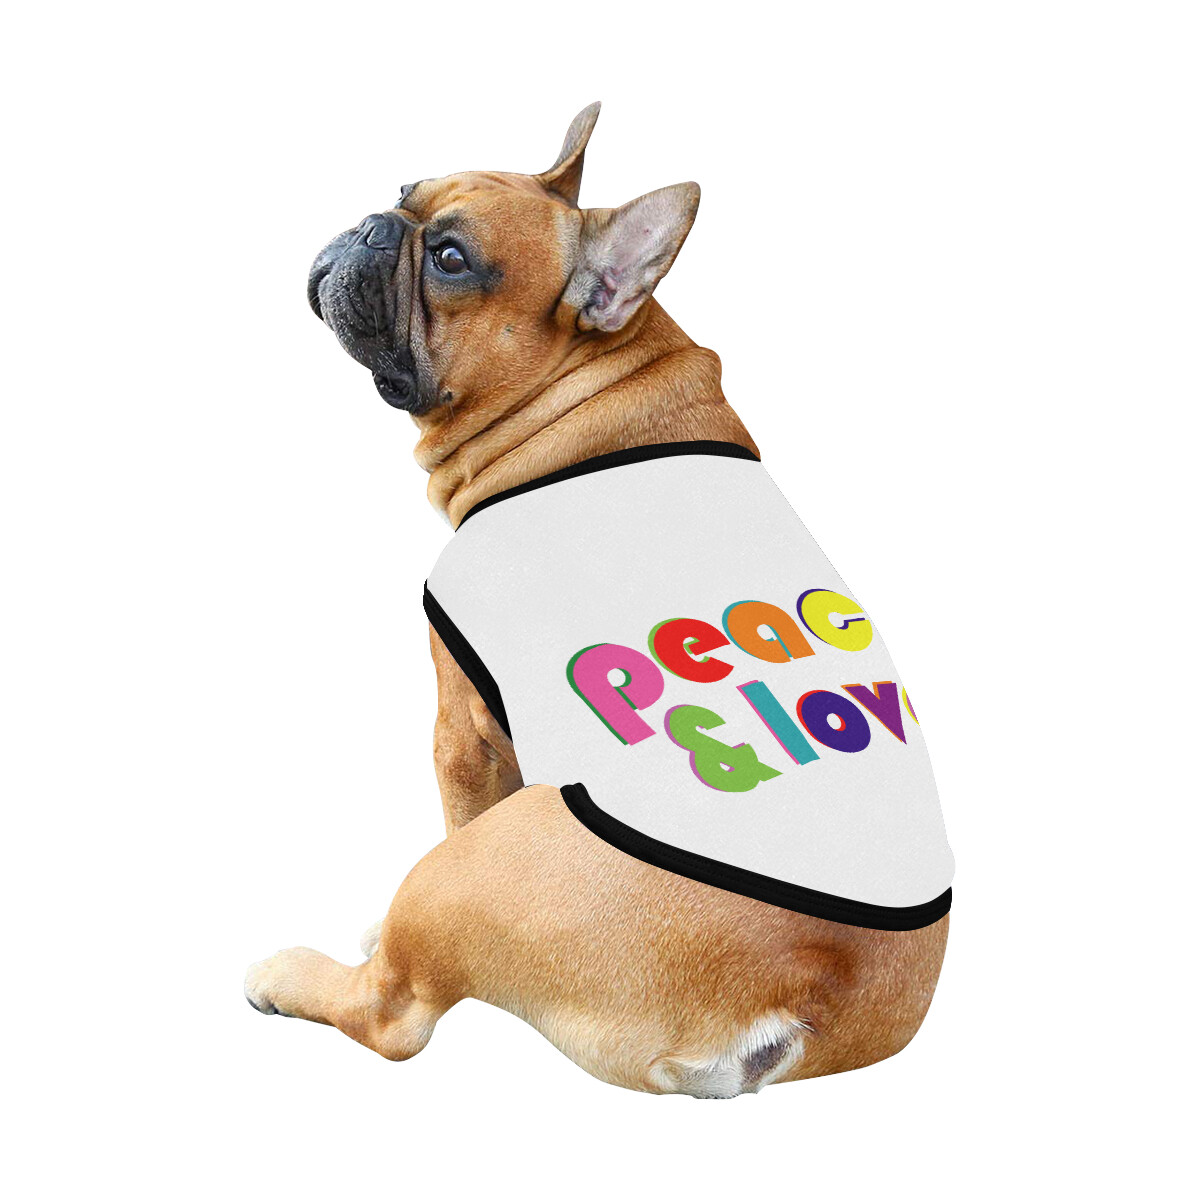 🐕 Peace & Love Dog shirt, Dog Tank Top, Dog t-shirt, Dog clothes, Gifts, front back print, 7 sizes XS to 3XL, dog gifts, white